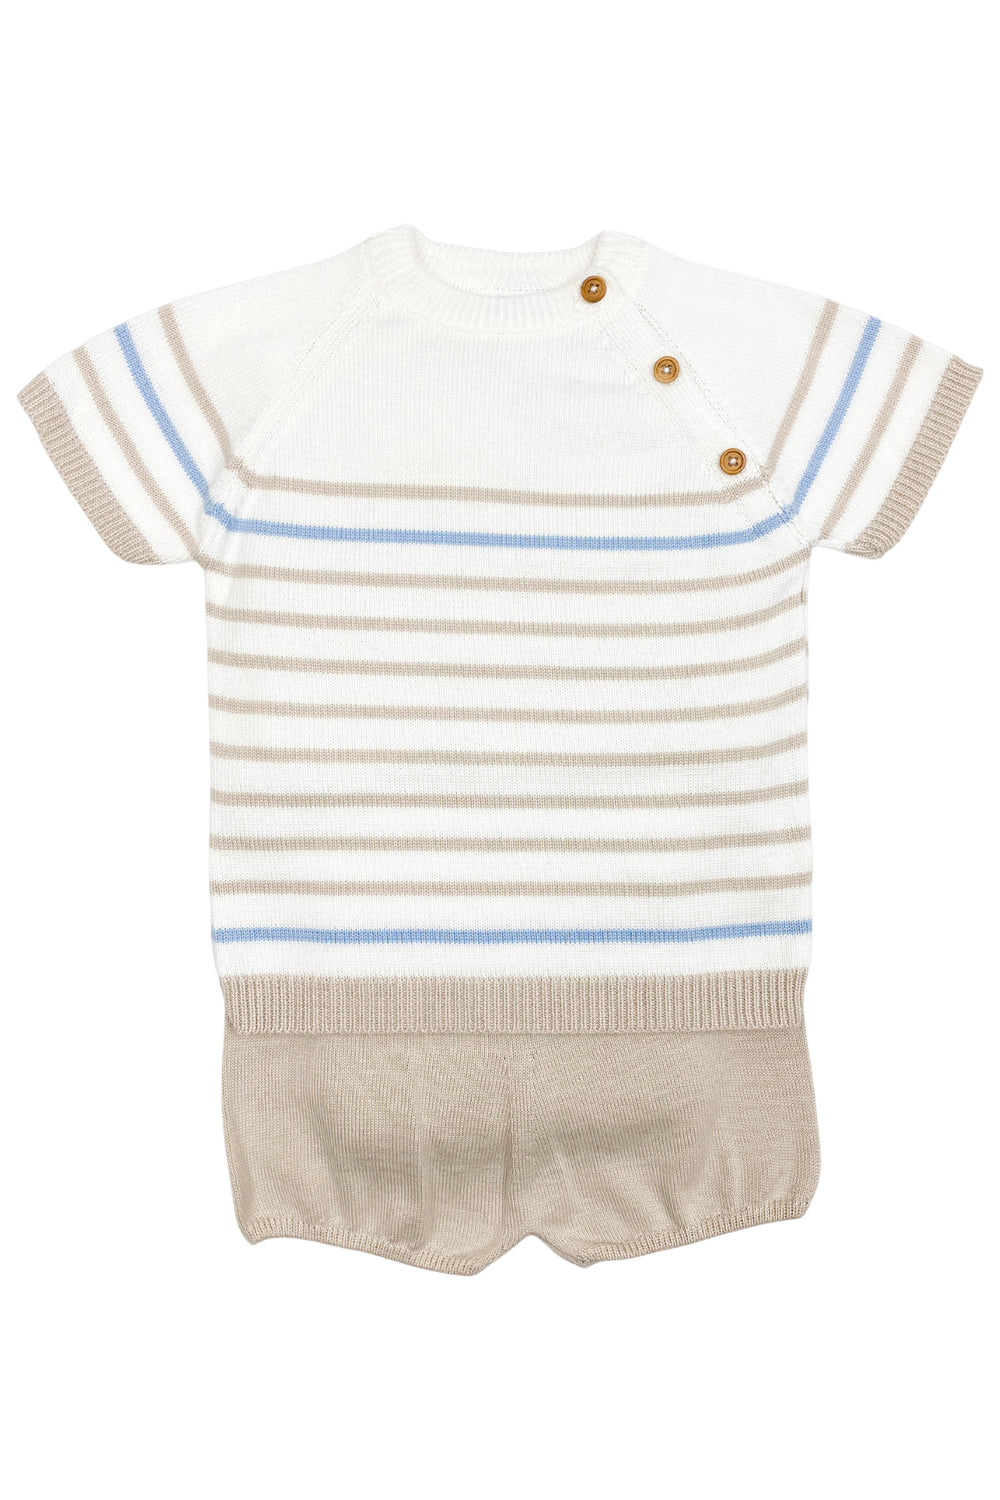 Granlei "Casper" Stone & Blue Striped Knit Top & Shorts | iphoneandroidapplications